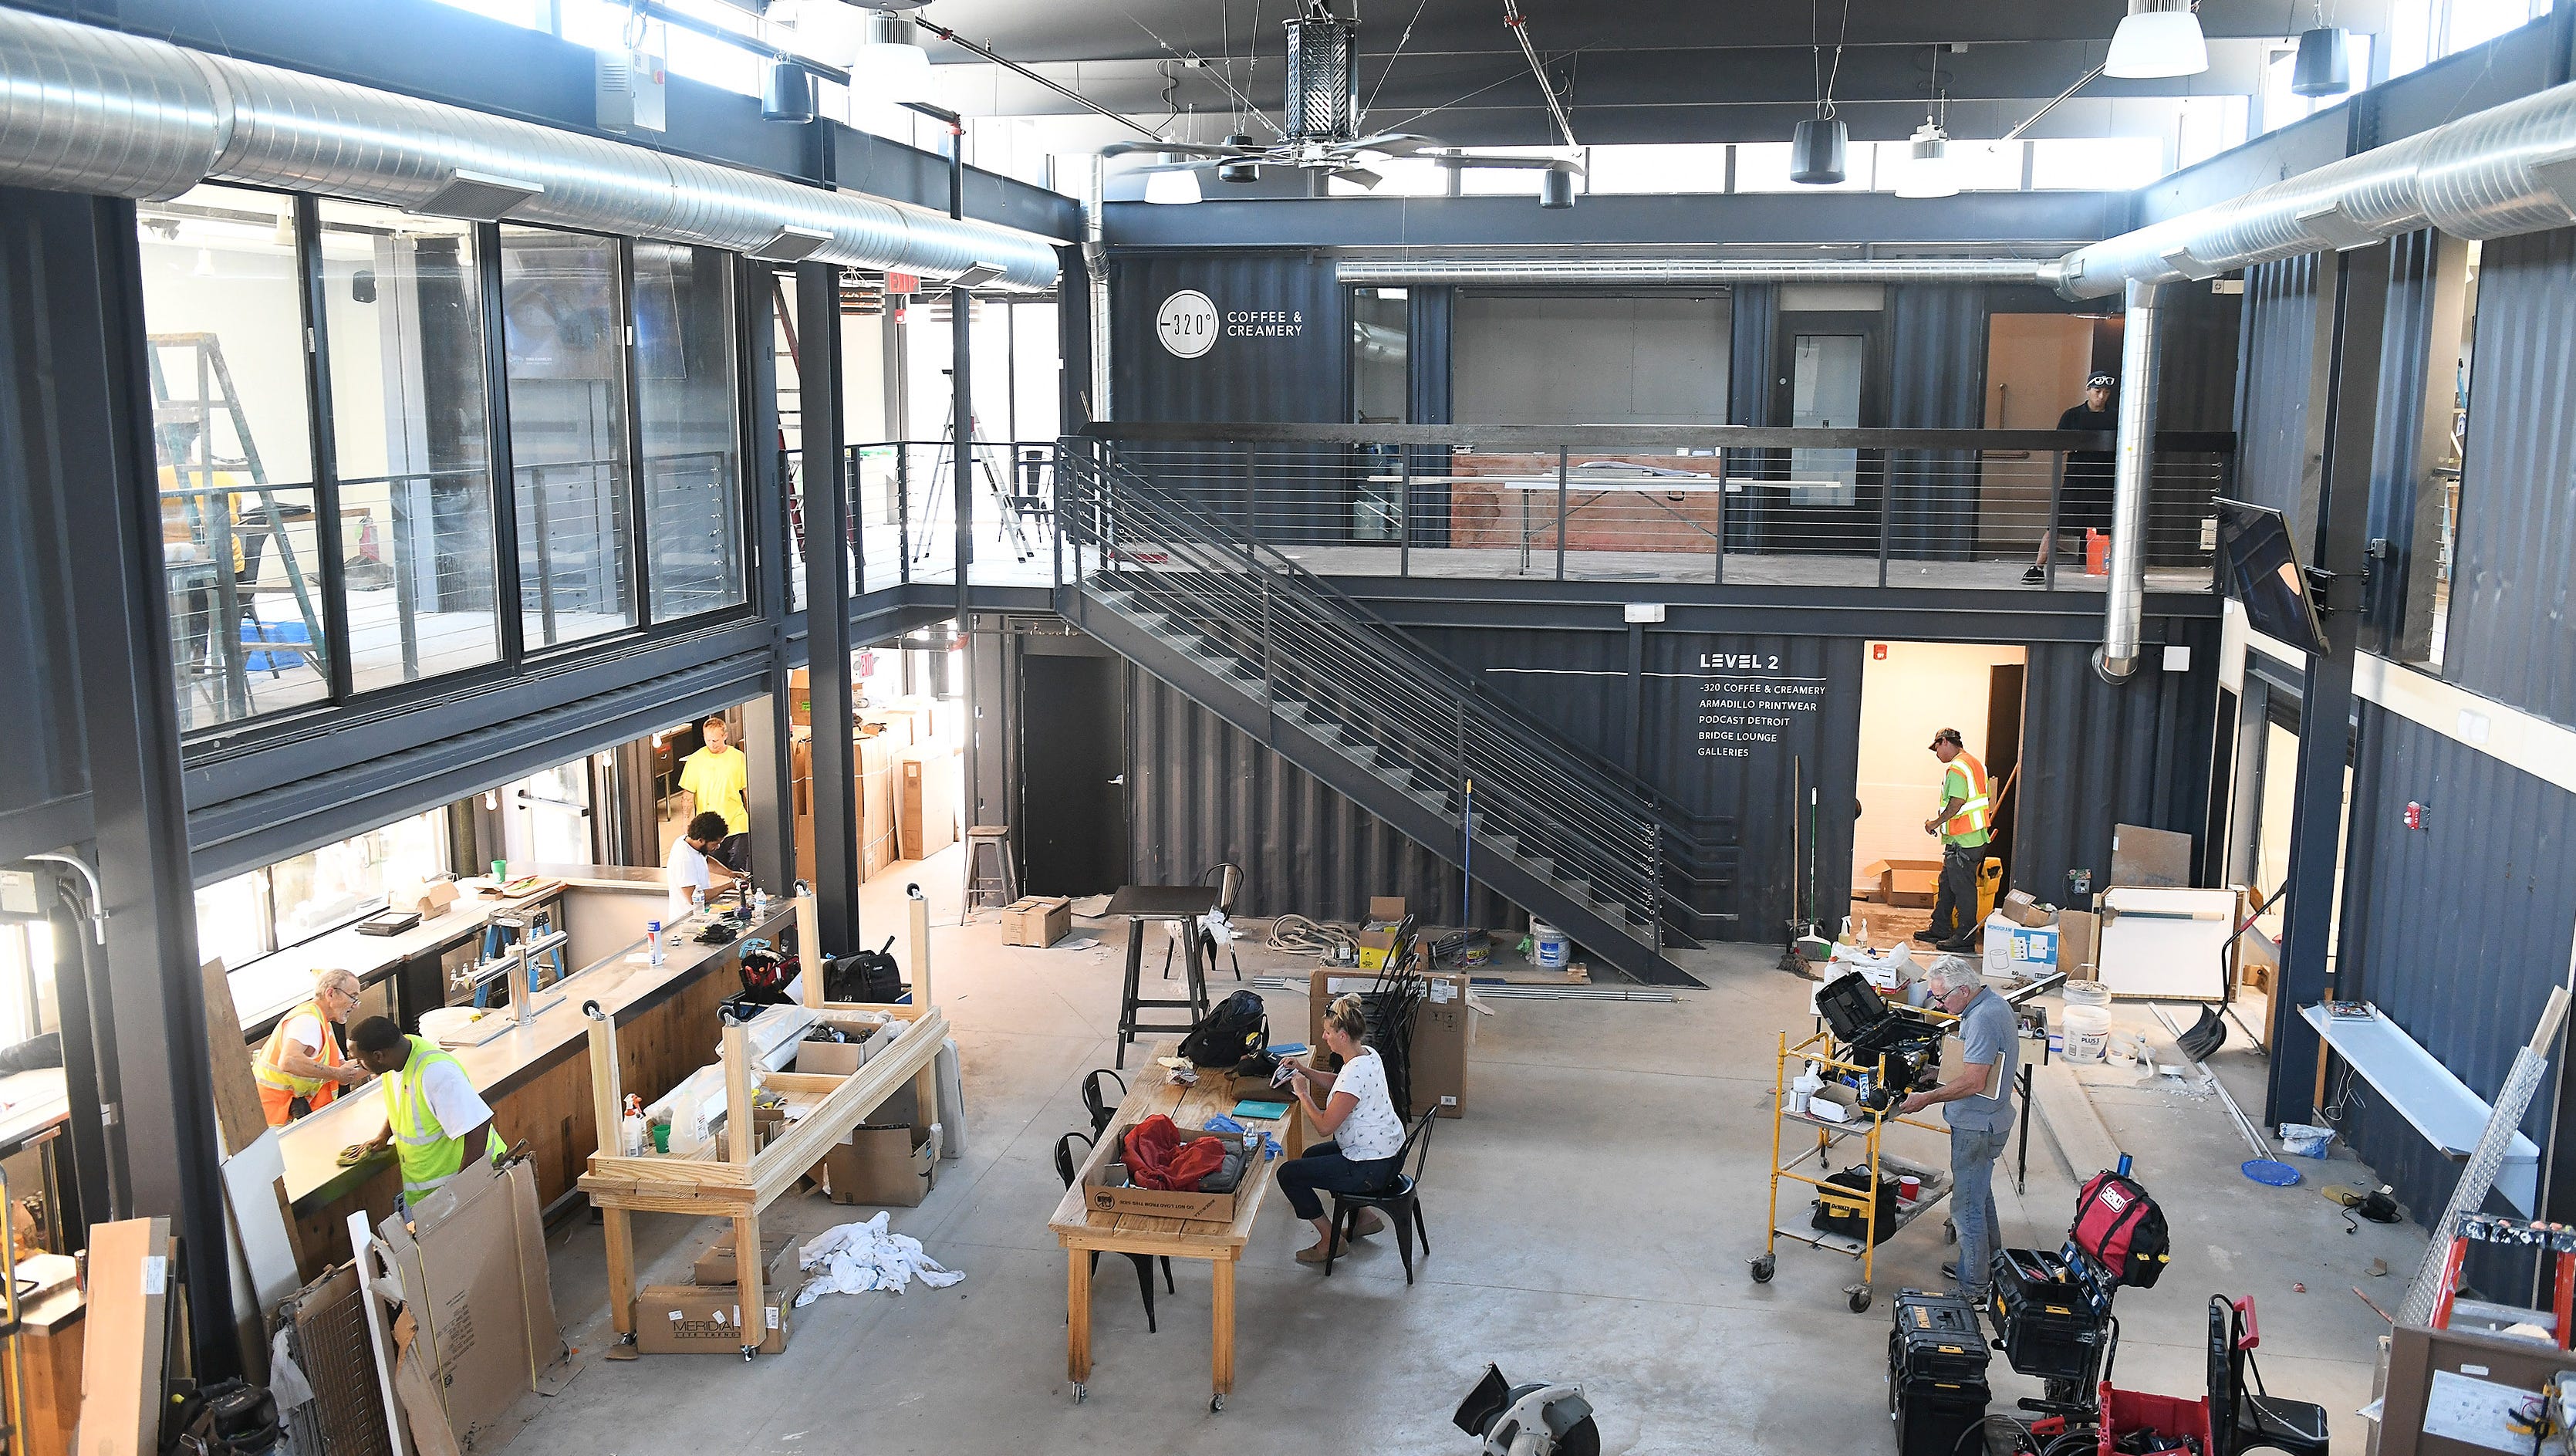 A view from the second level of the indoor food hall and bar which has an open feel and natural light from above at Detroit Shipping Co. on Peterboro Street in Detroit on July 9, 2018. Detroit Shipping Co. is comprised of 22 shipping container and houses five restauranteurs, a coffee shop and an outdoor courtyard with a stage.